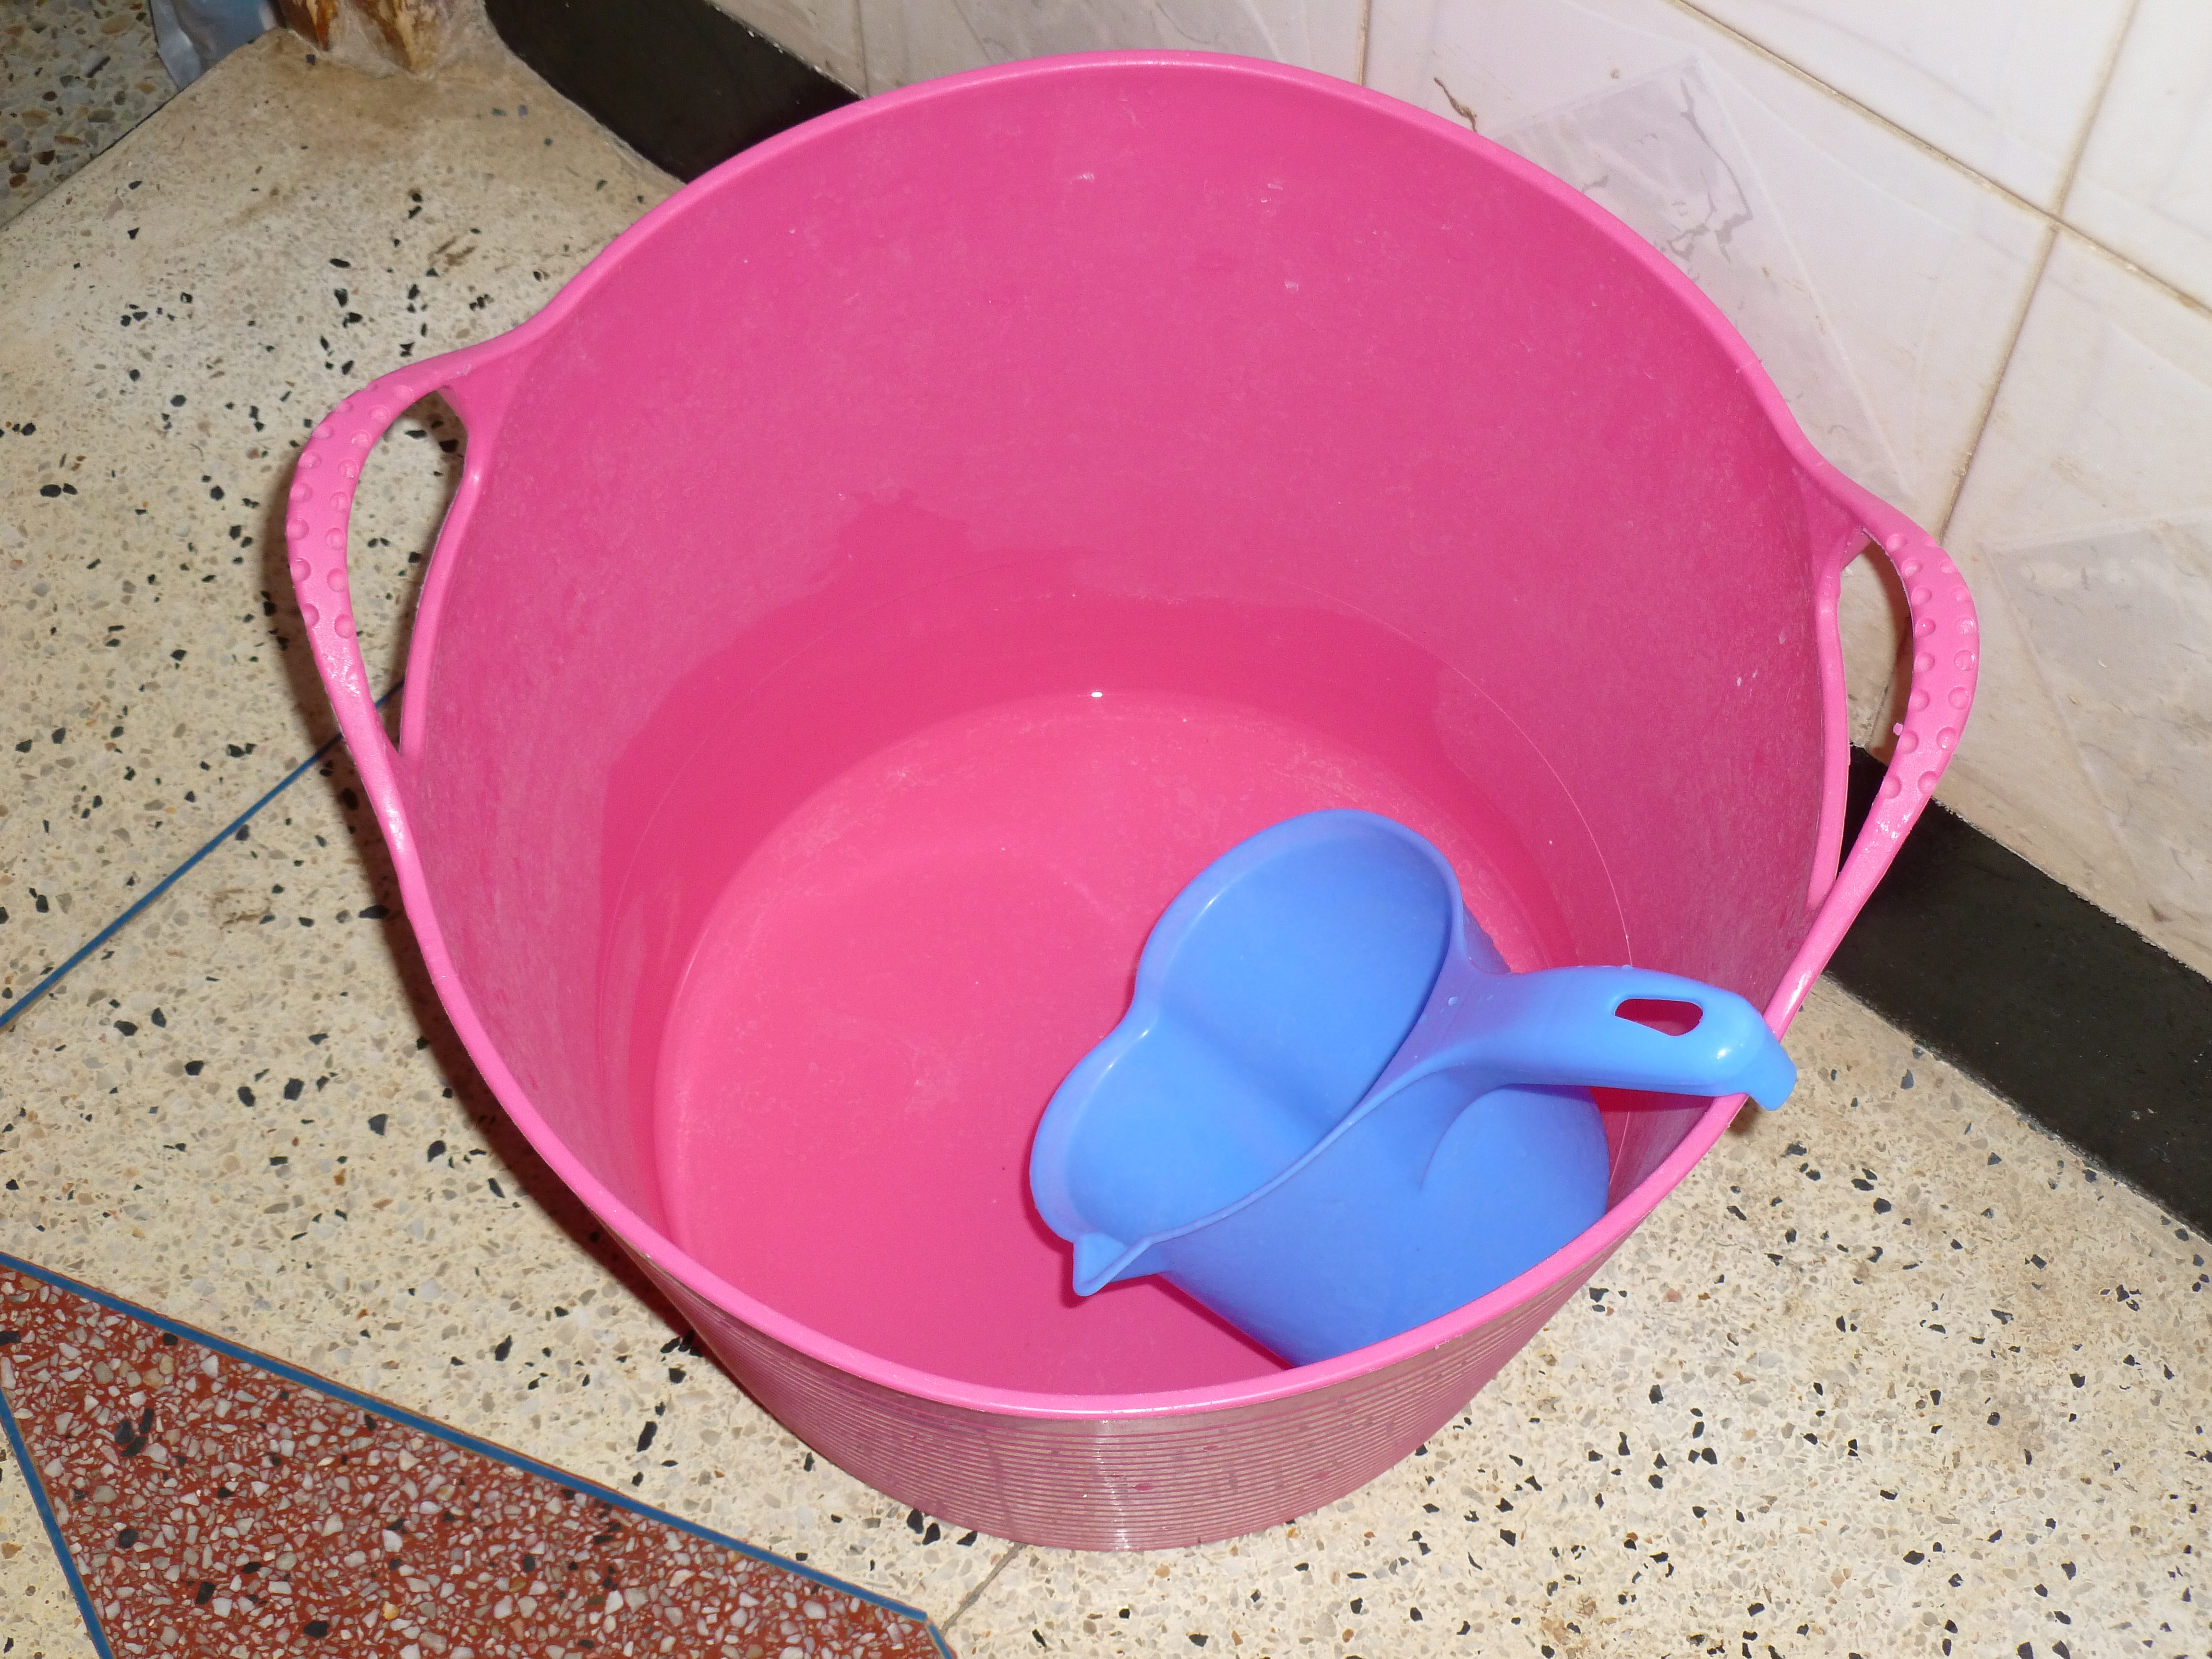 Bucket Showers & How To Use Them